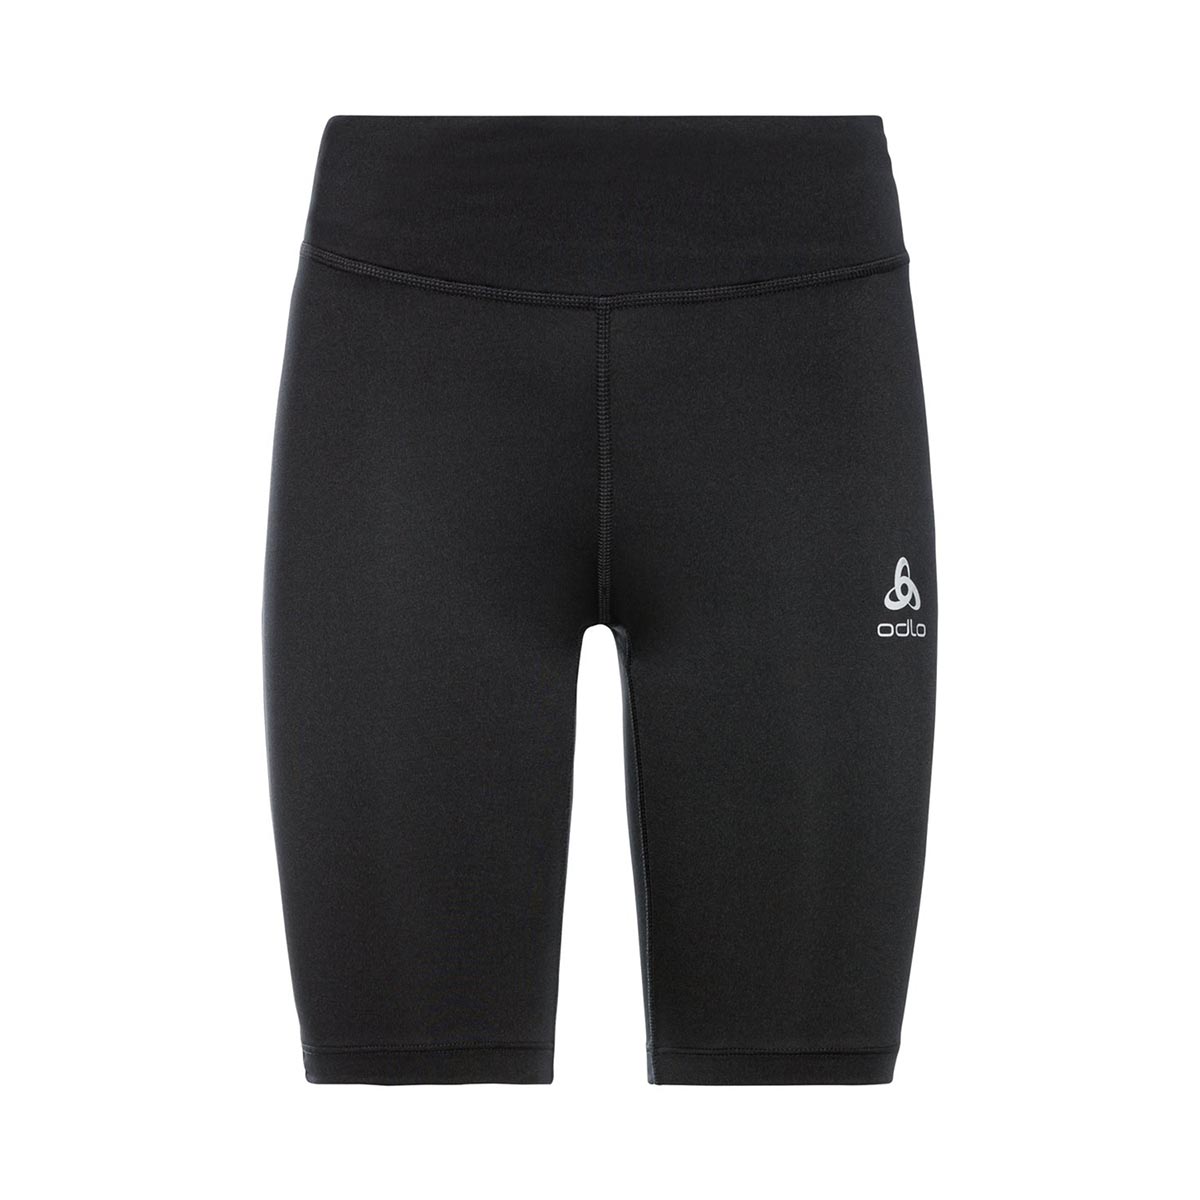 ODLO - THE ESSENTIAL TIGHT SHORTS